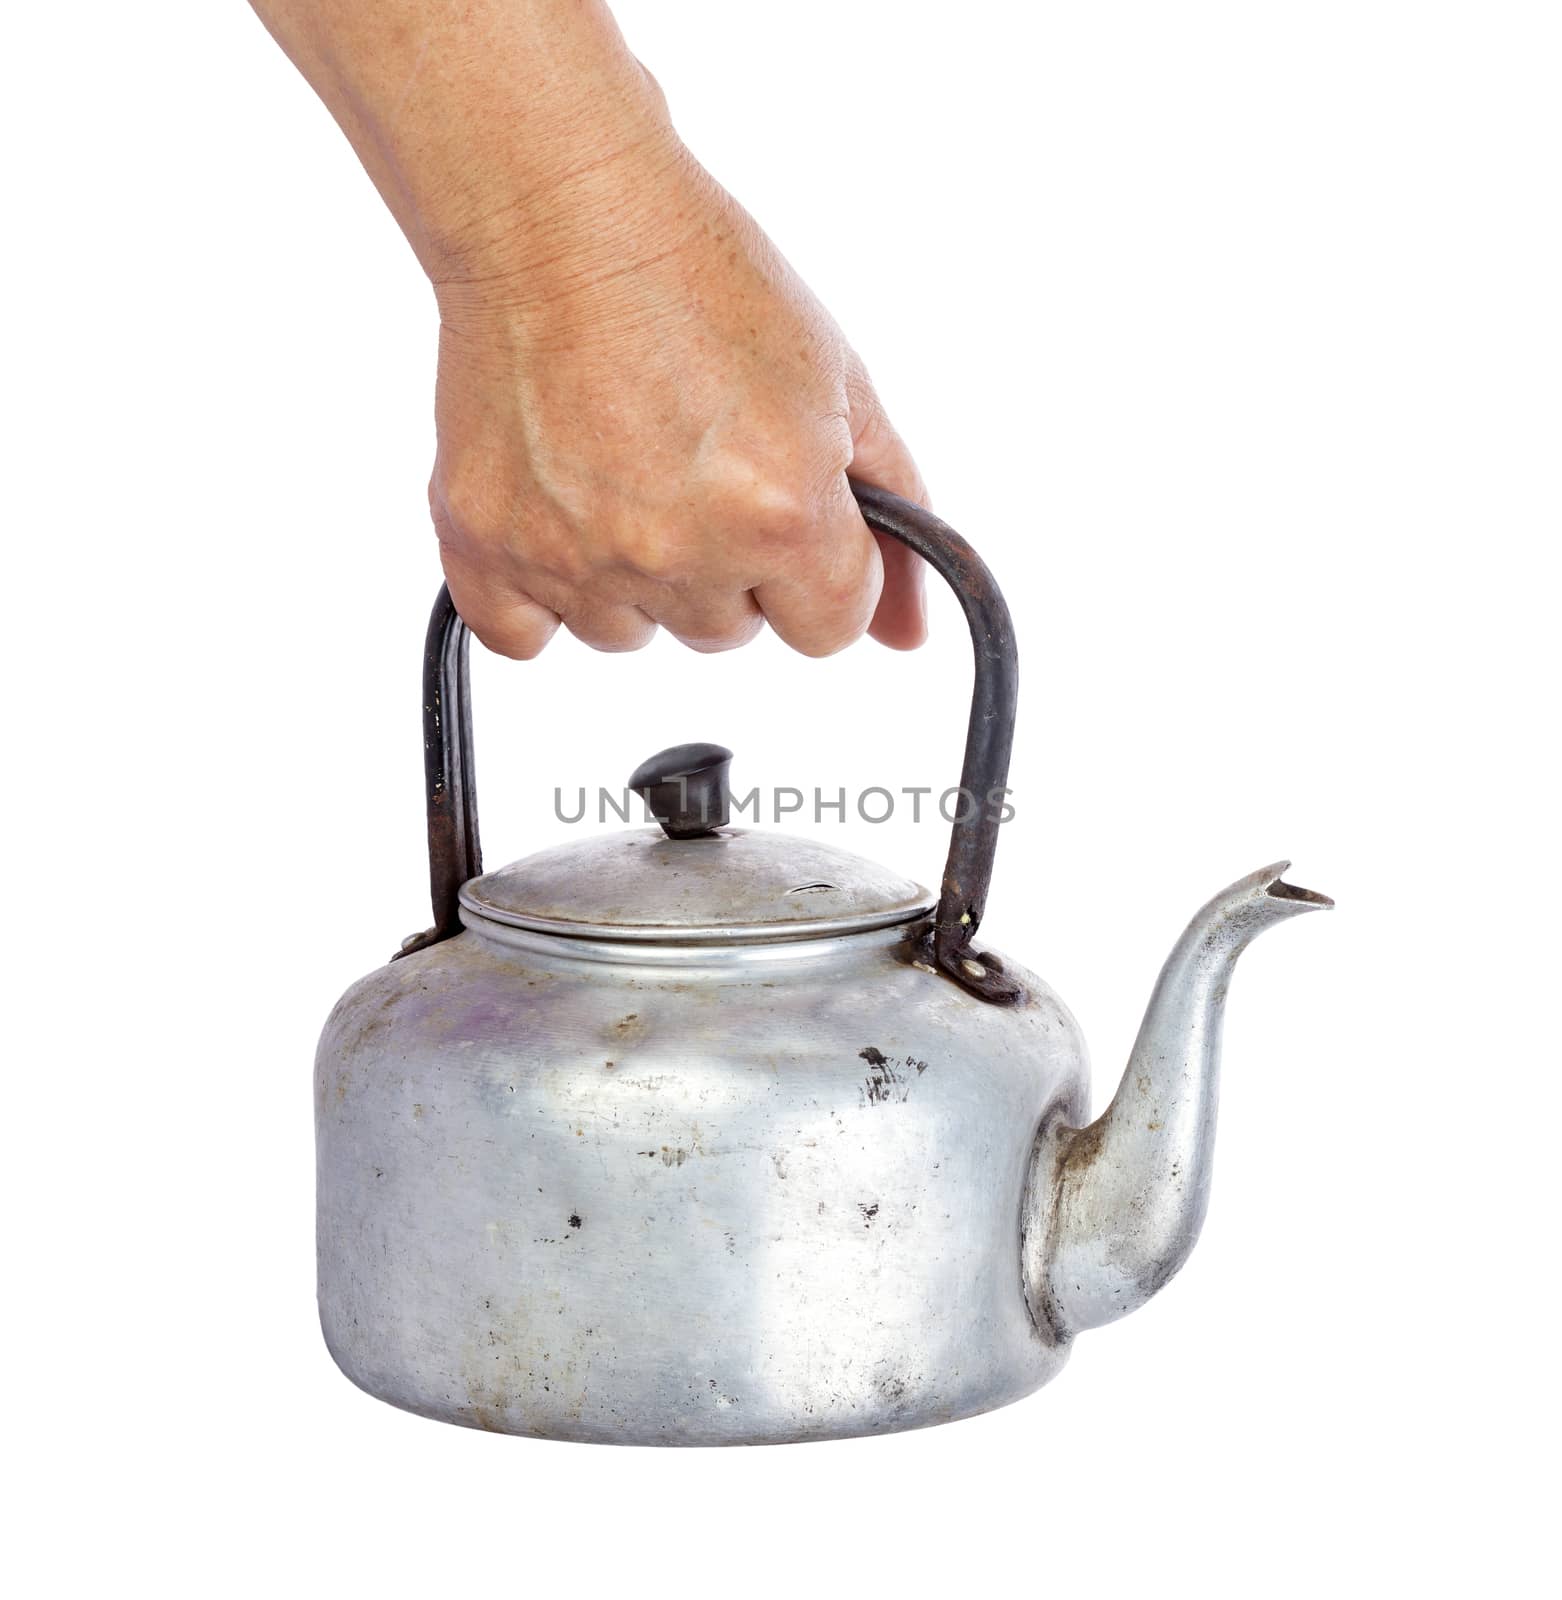 old dirty classic aluminum kettle holding in hand isolated on white background